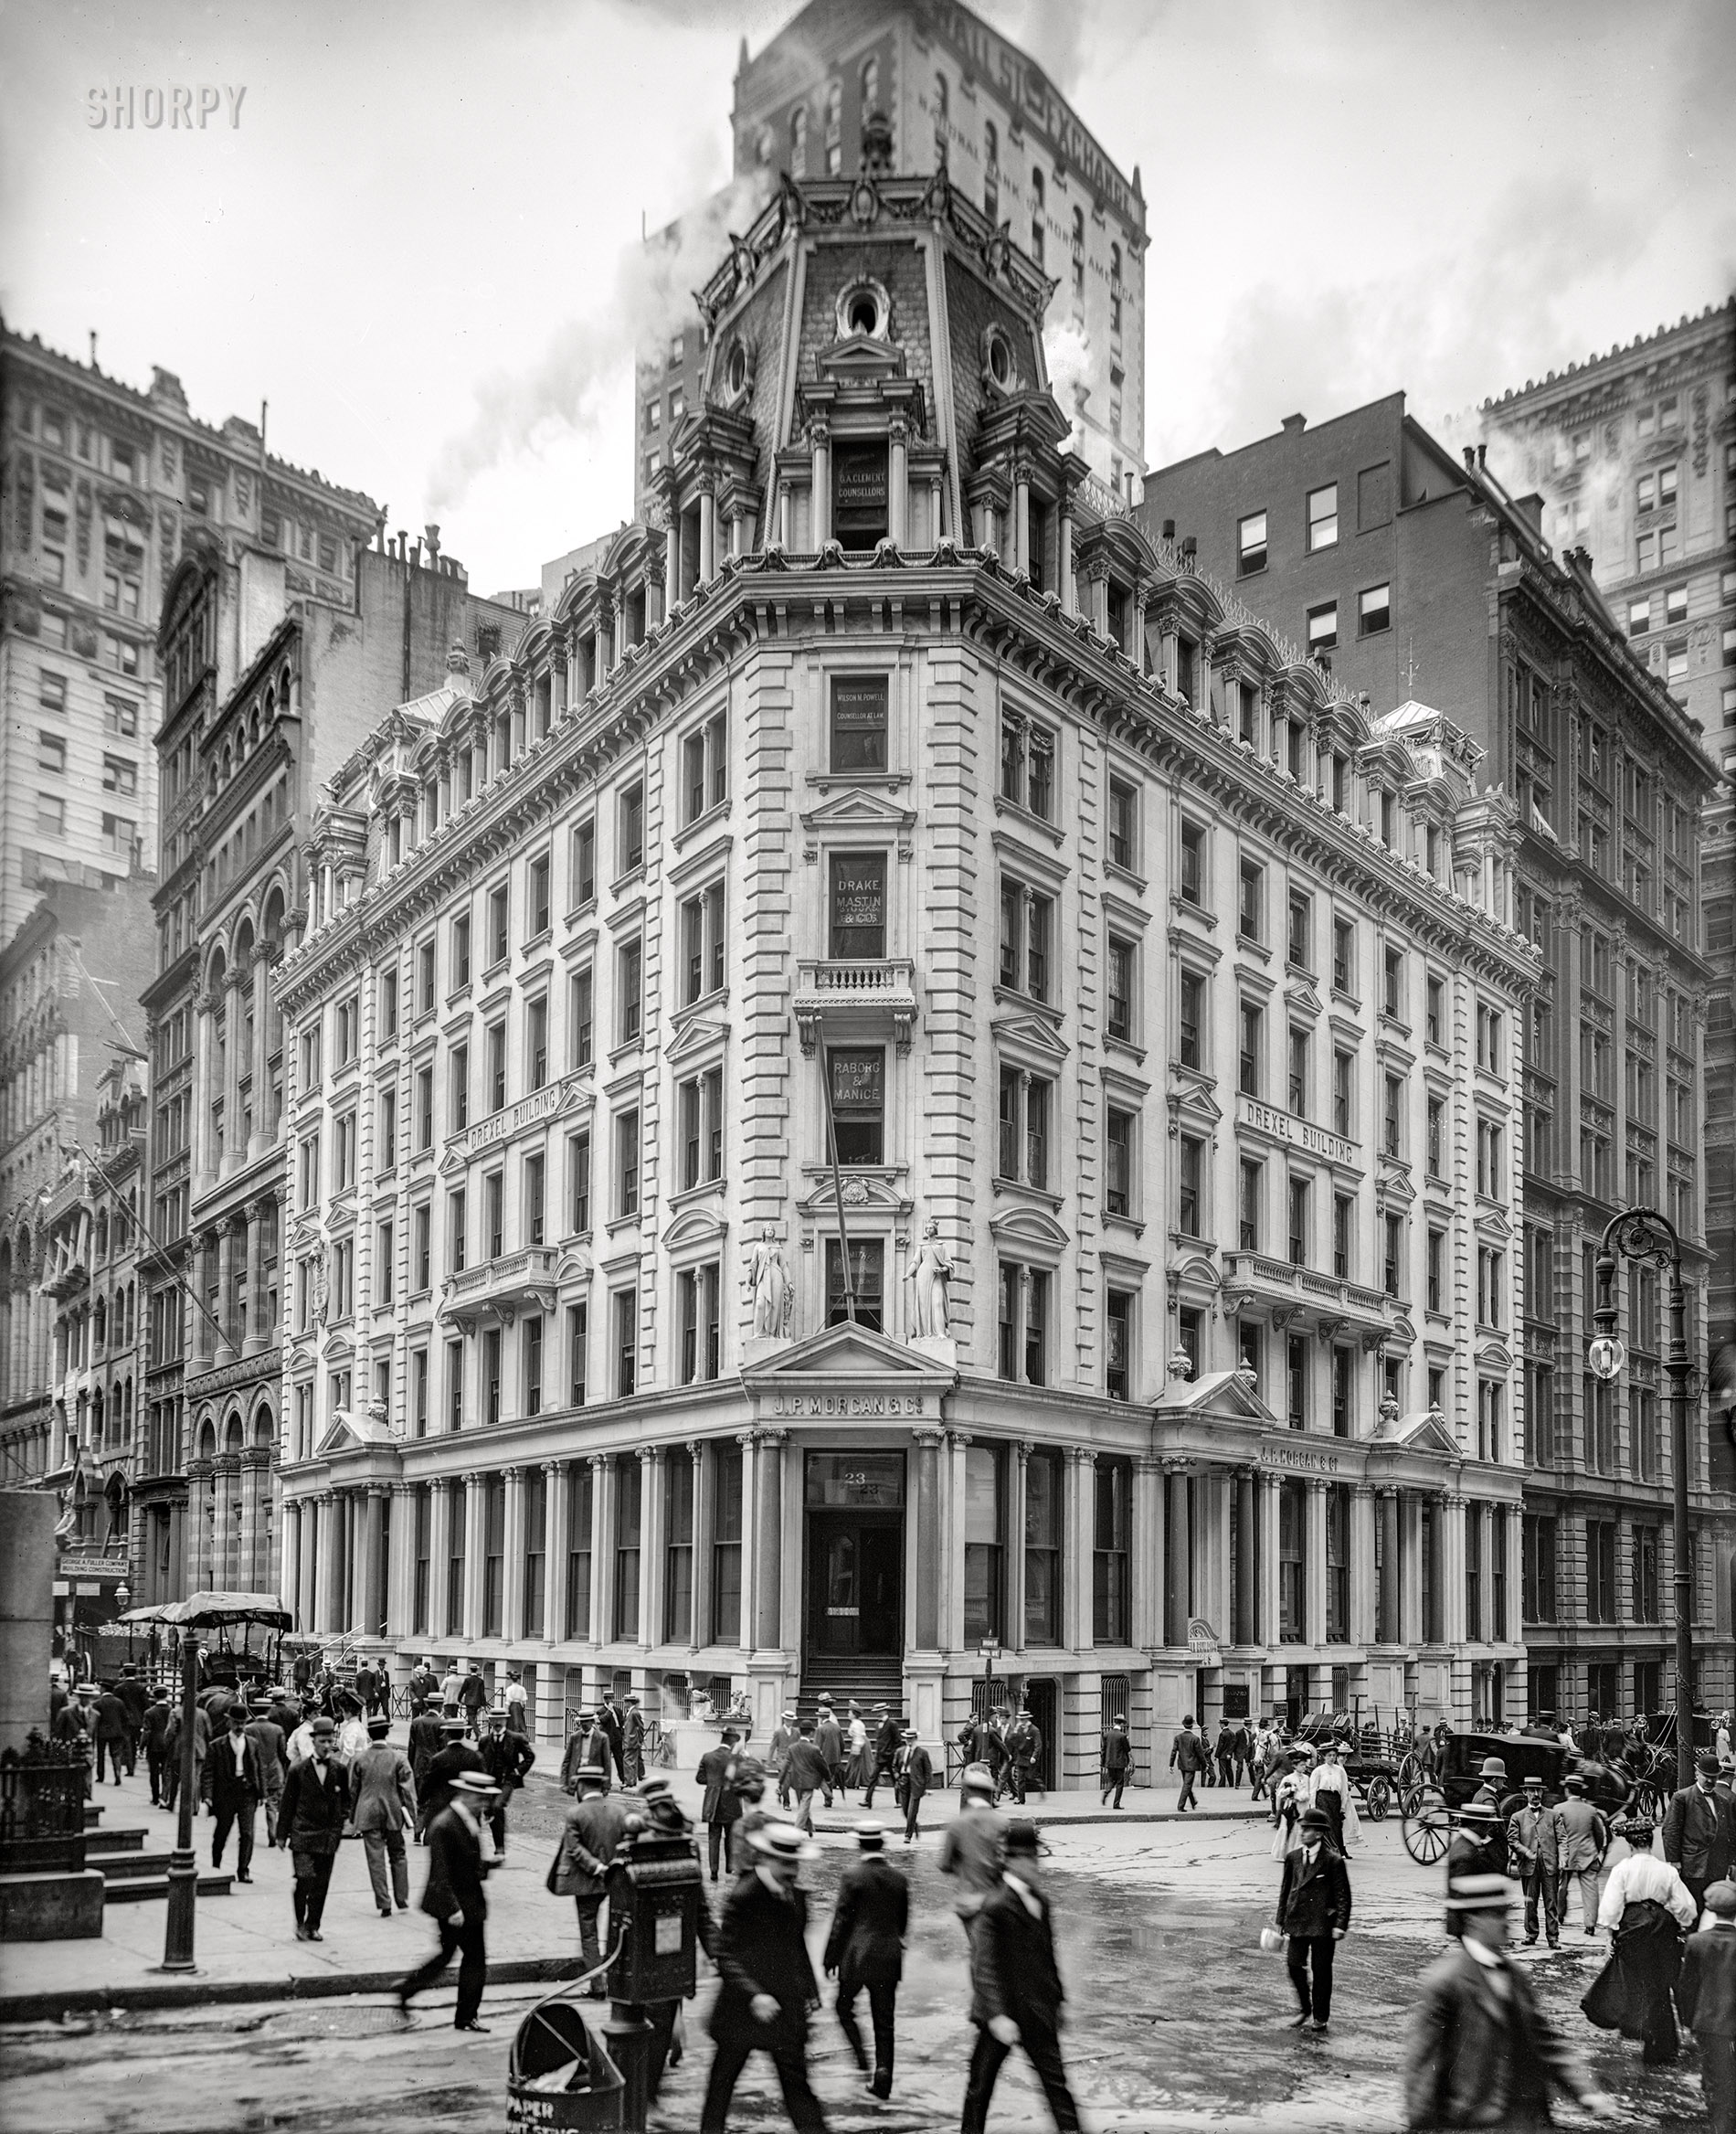 New York circa 1906. "Drexel Building -- Offices of J.P. Morgan & Co., Wall and Broad Streets." 8x10 inch dry plate glass negative, Detroit Publishing Company. View full size.